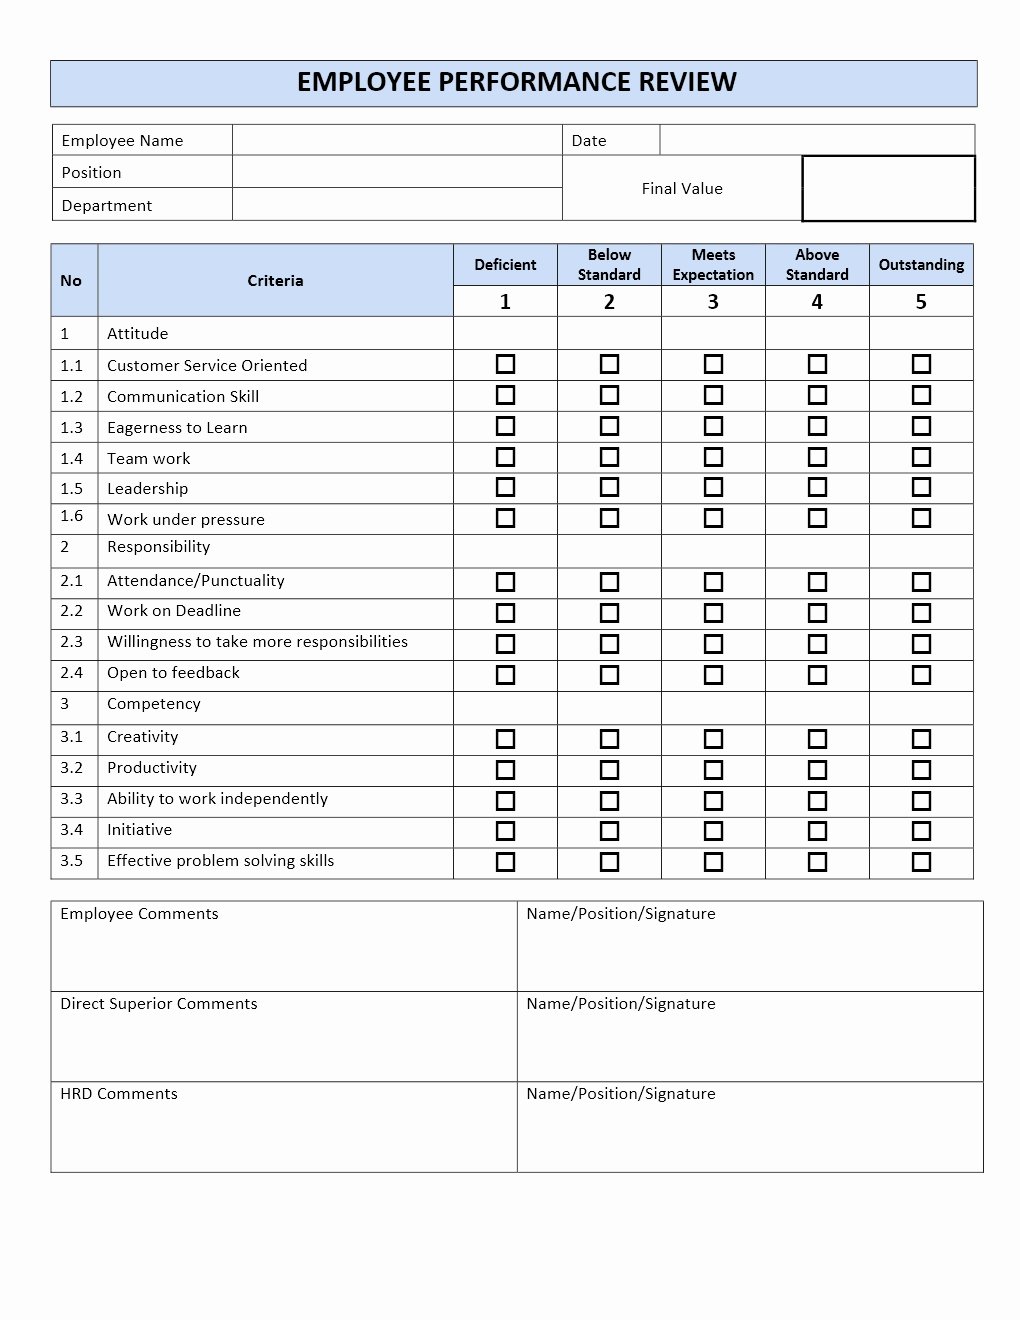 Employee Performance Review form